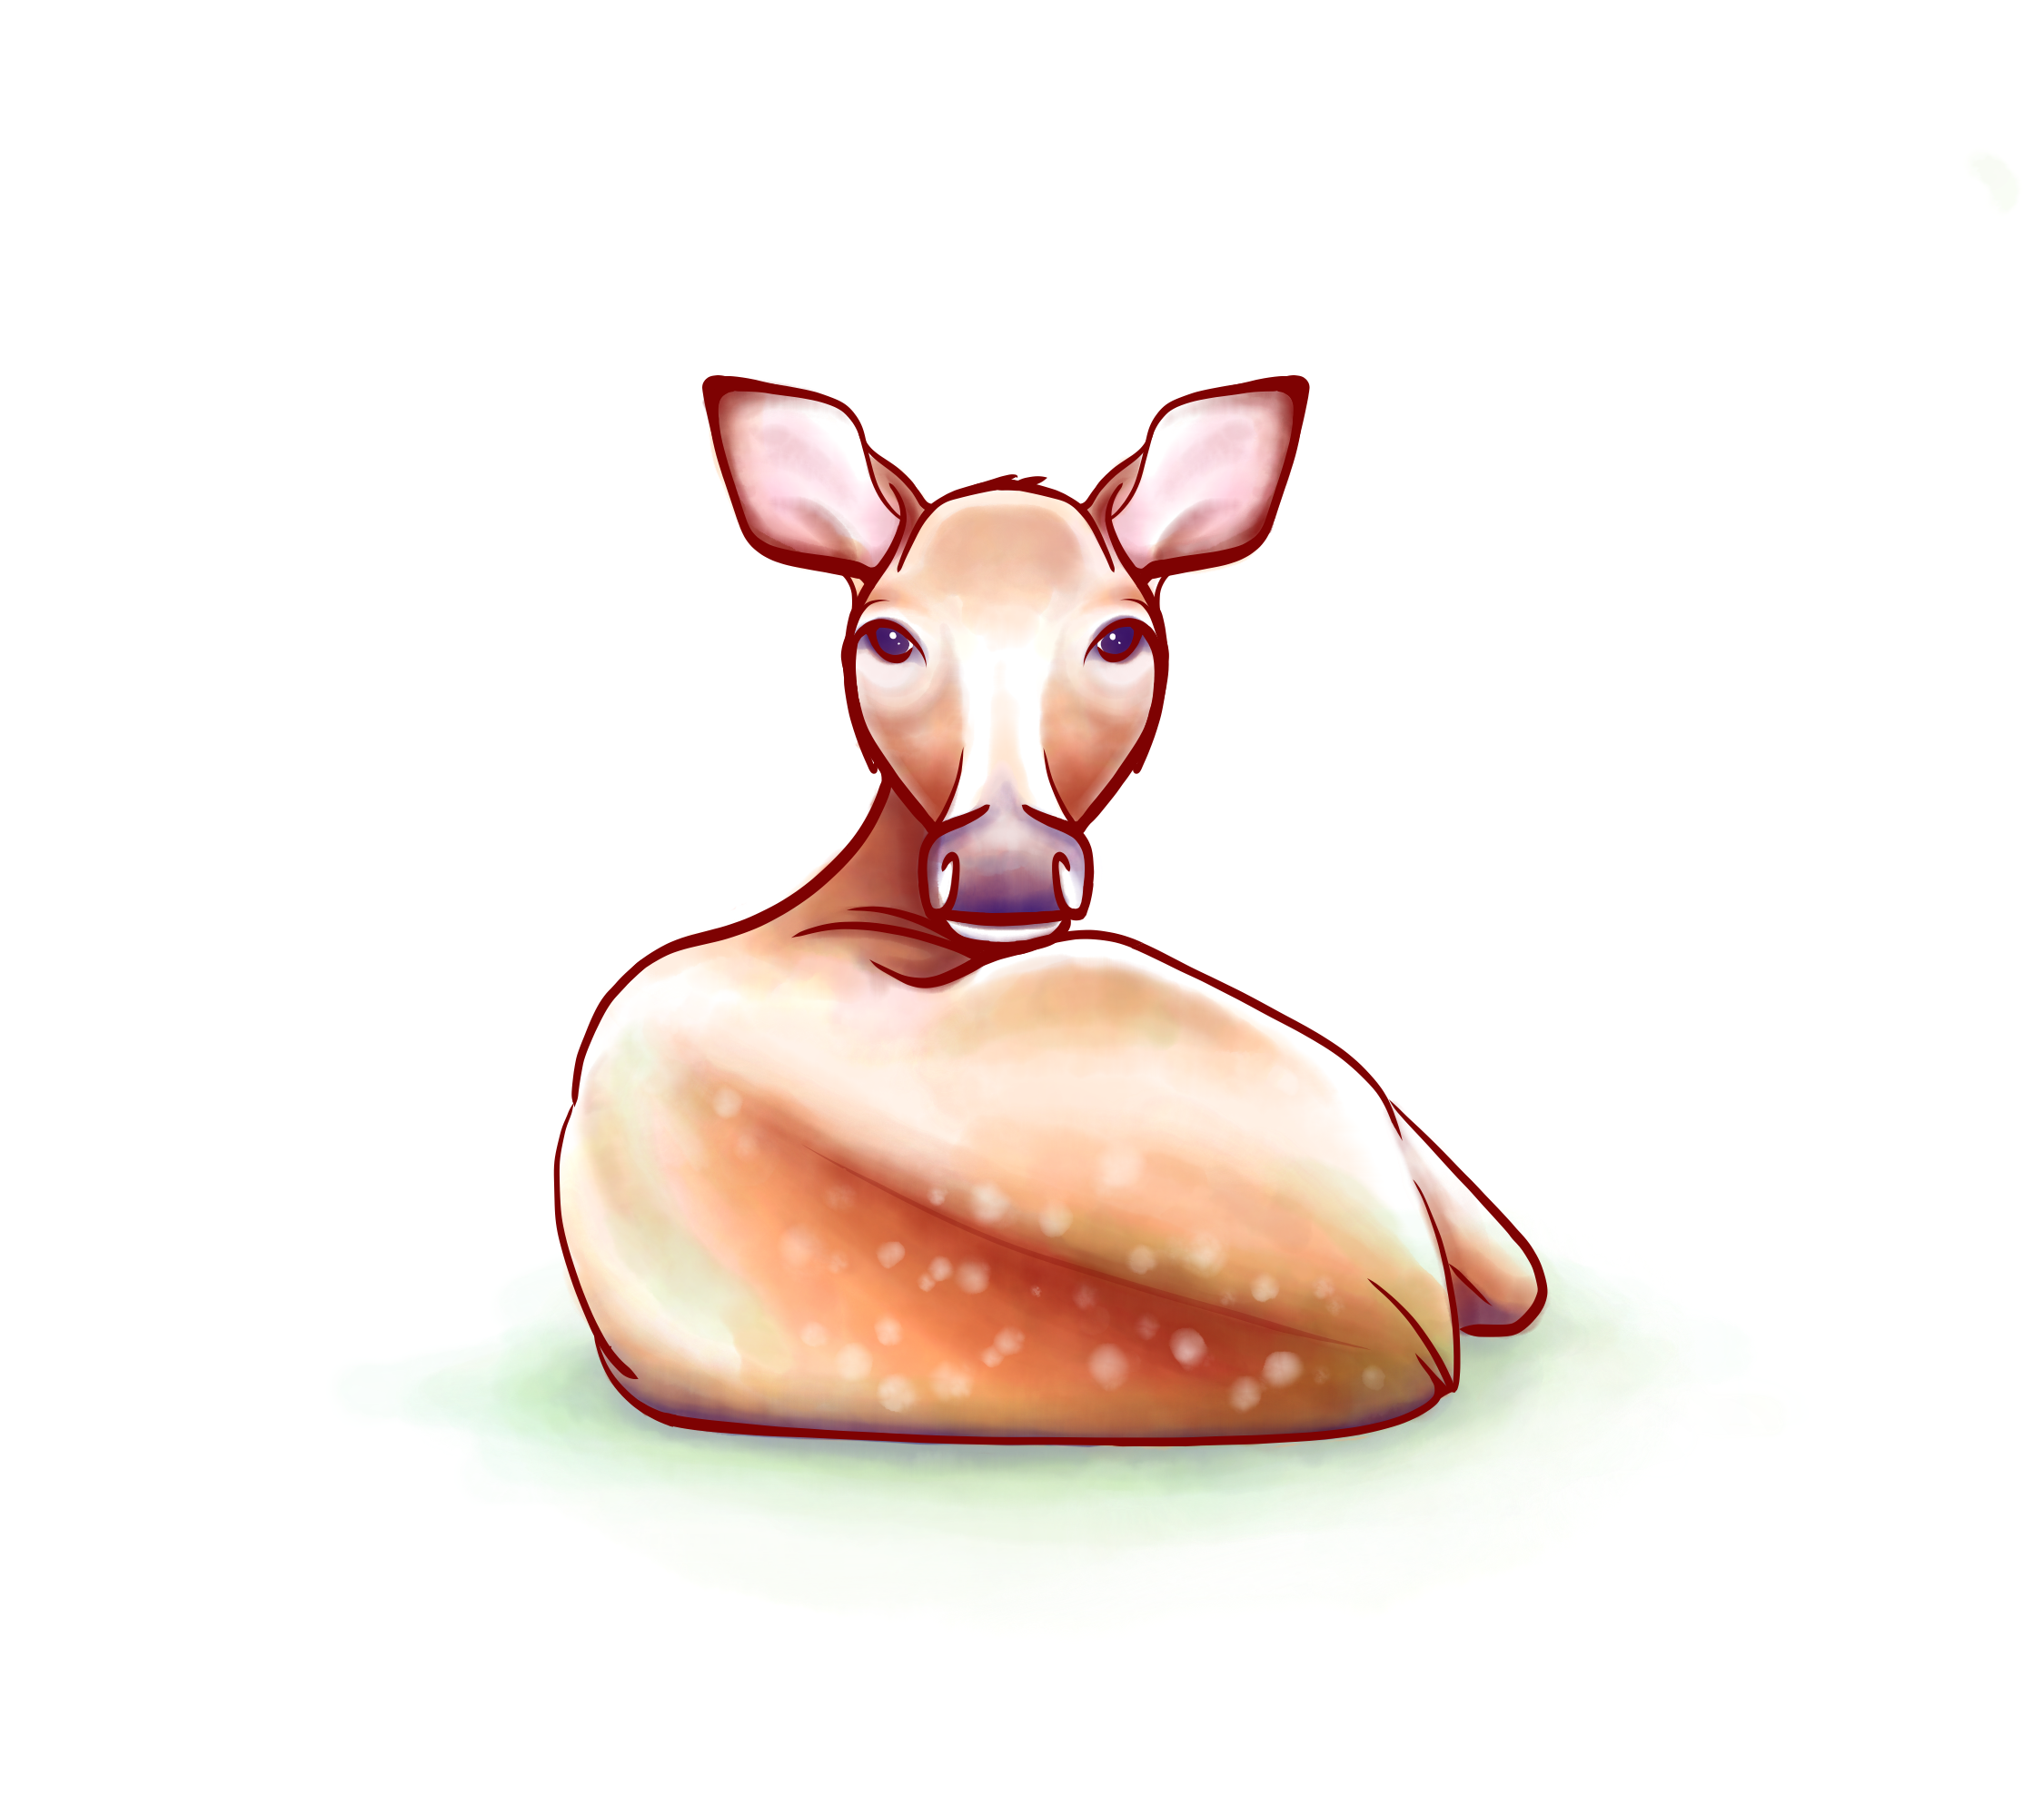 Illustration of a deer curled up on the ground, looking back towards the viewer over it's body, in a watercolor style.